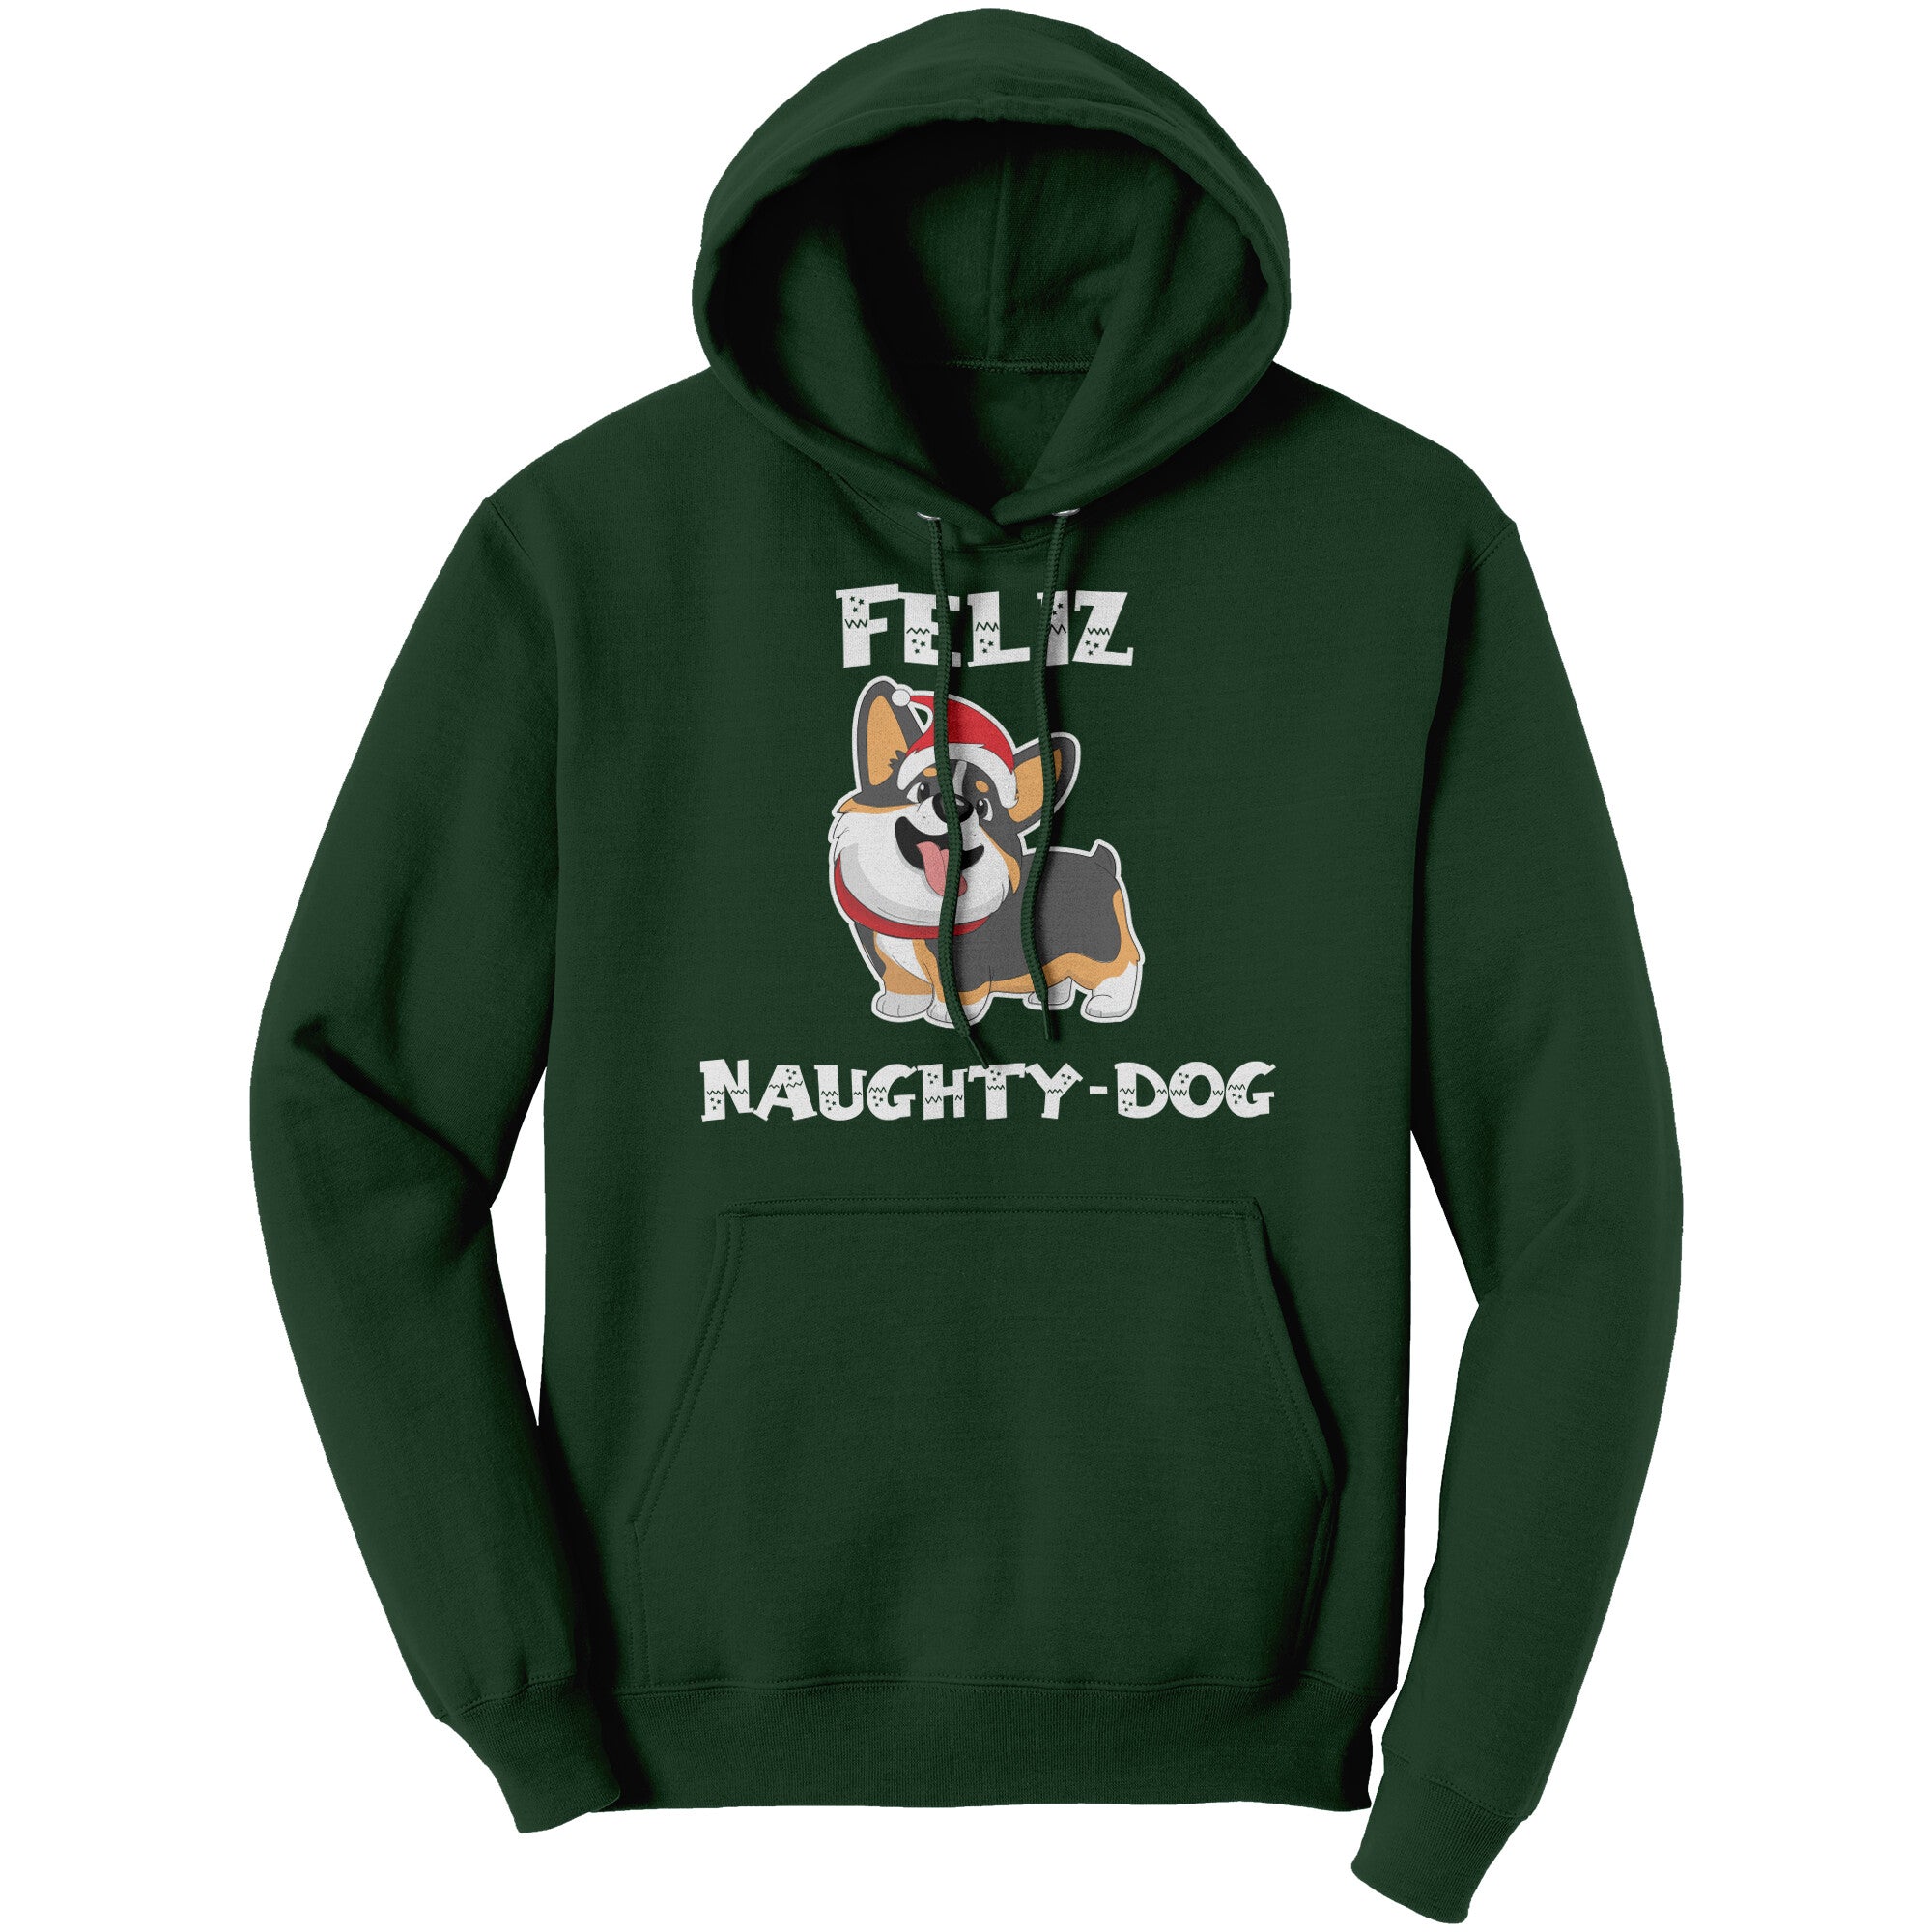 The Official Naughty Dog Shop is now Open!